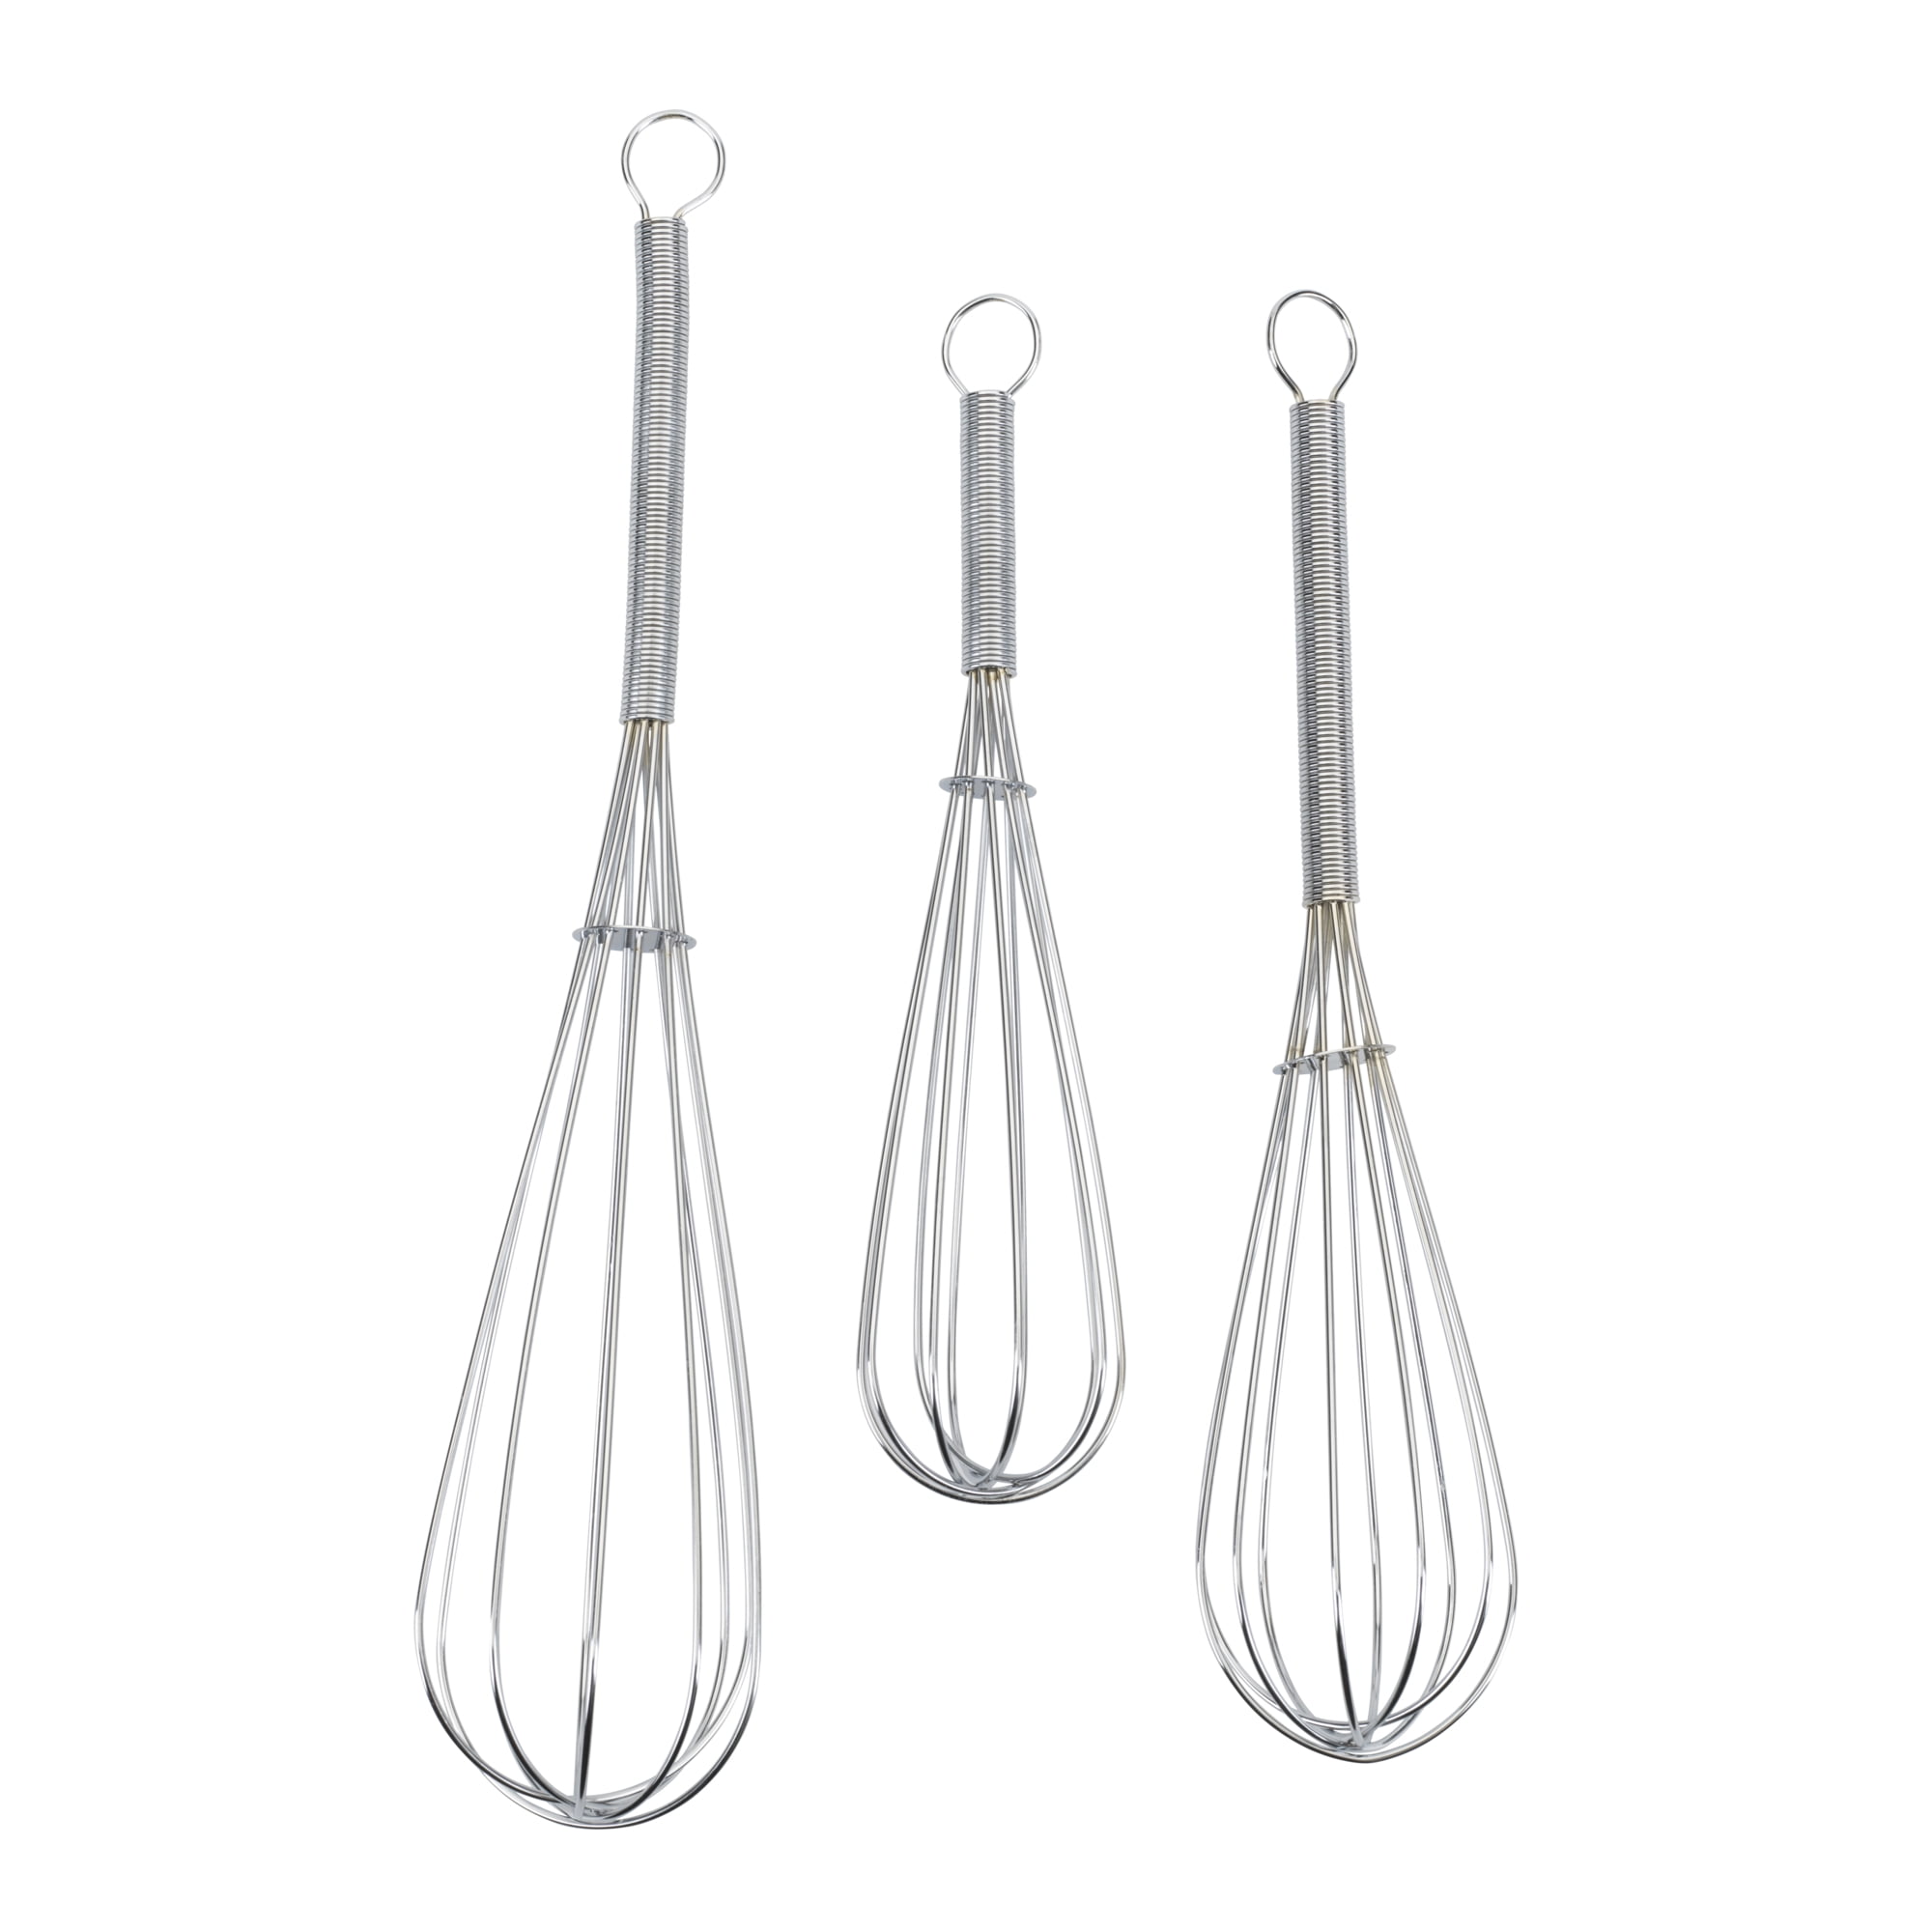 Whisk balloon-shaped with handle made of Exoglass - 170016